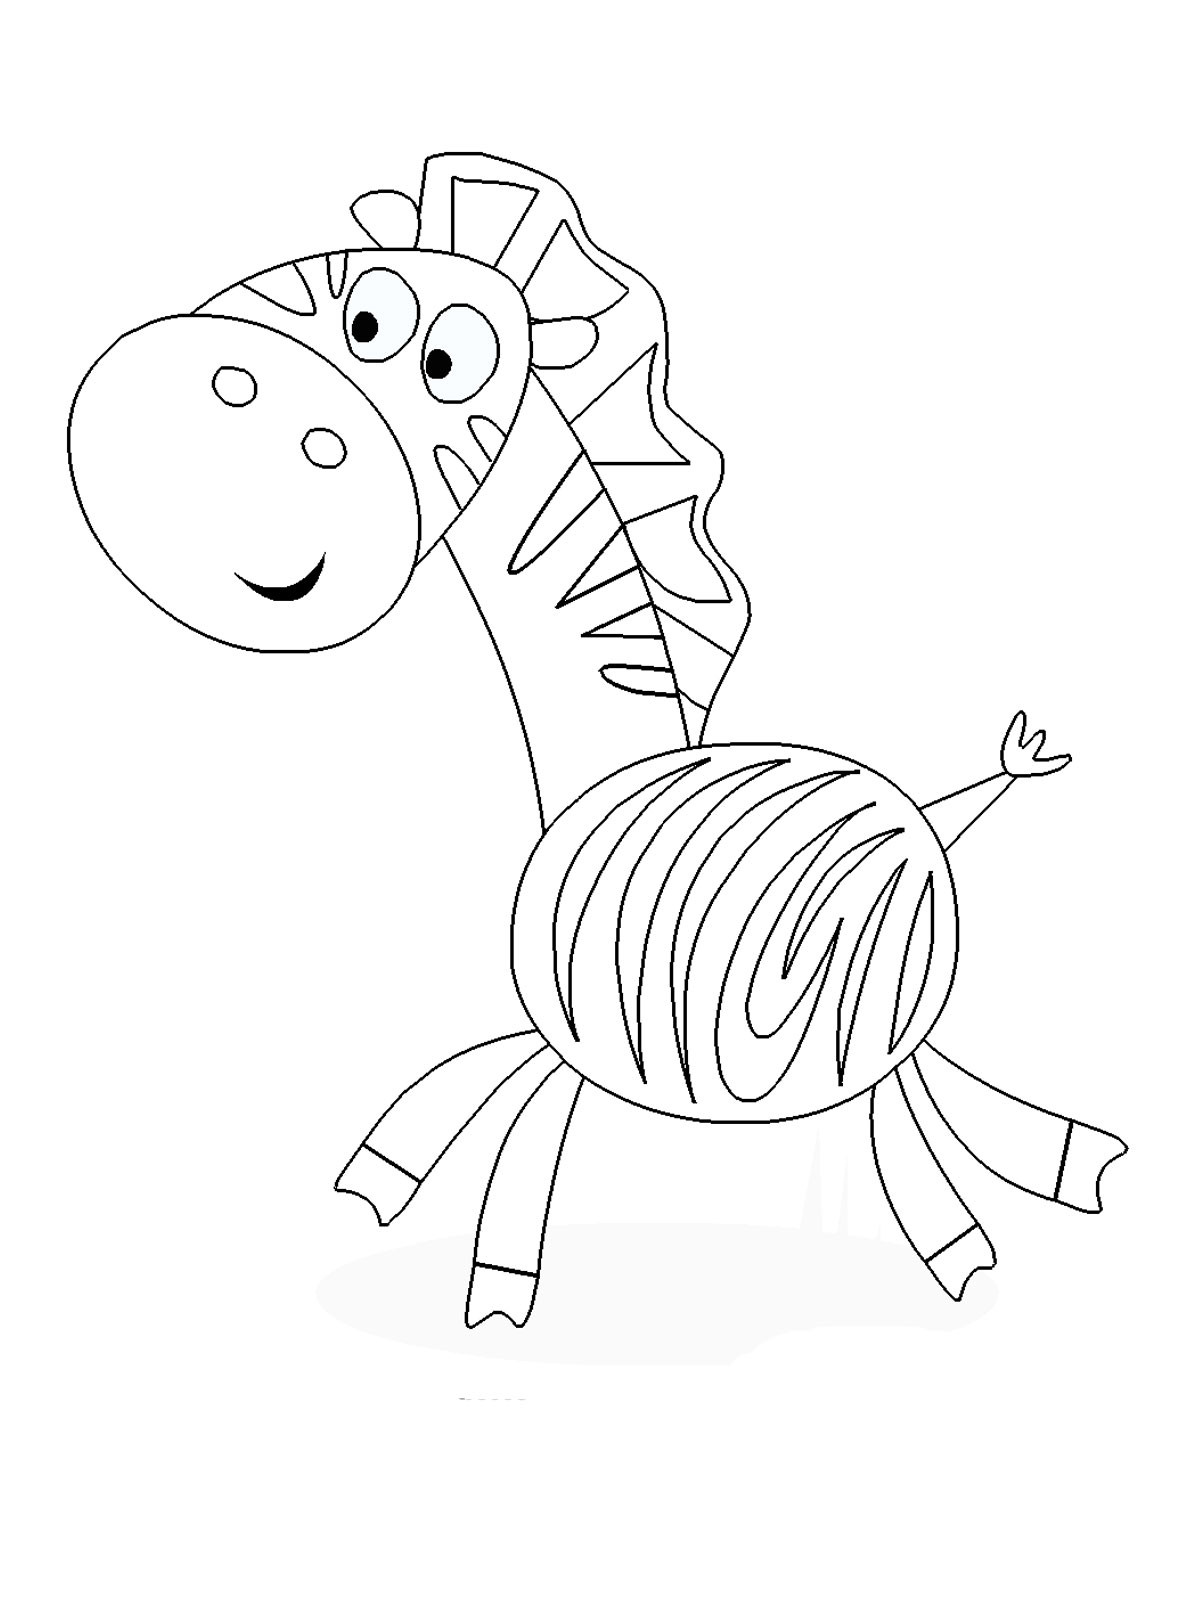 Printable Animal Coloring Pages For Kids
 Printable coloring pages for kids